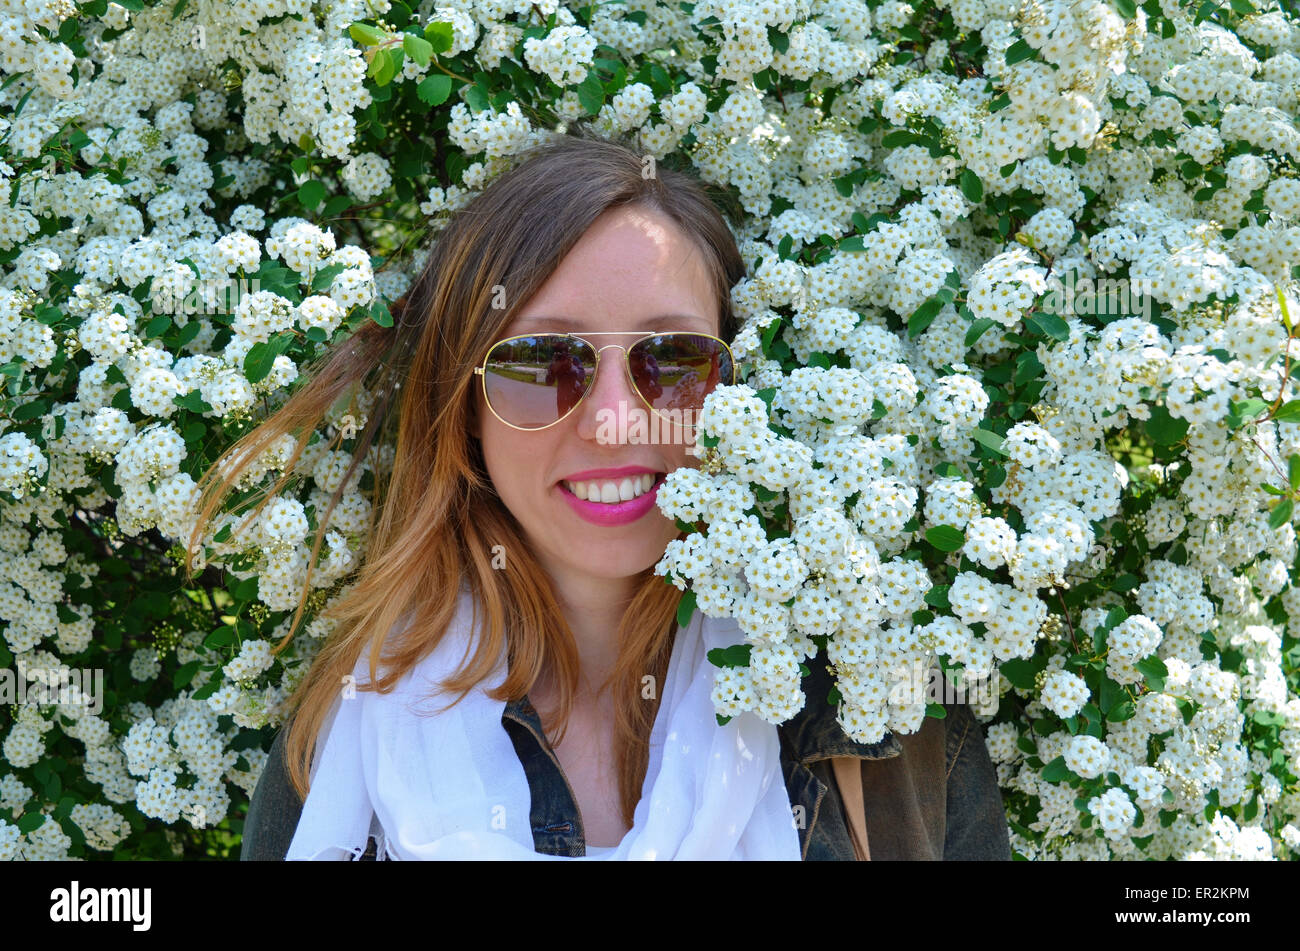 Happy young girl wearing sunglasses posing surrounded by flowers Stock Photo